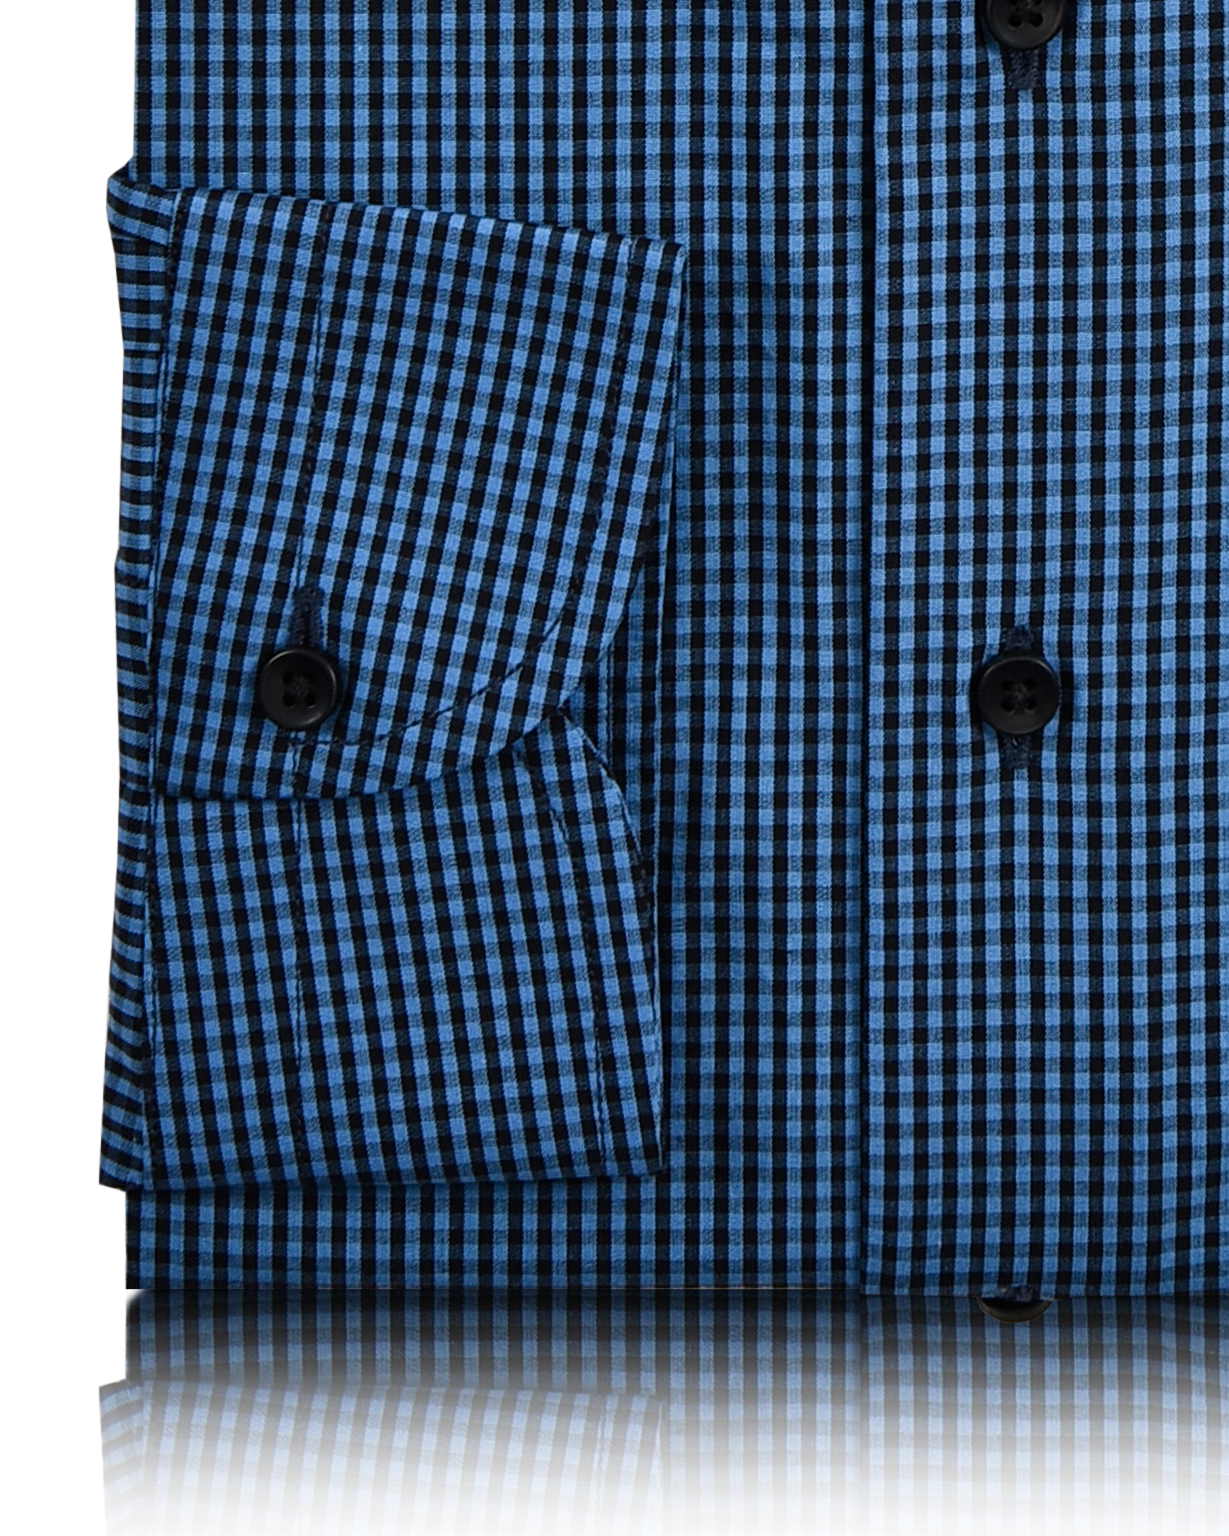 Close up view of custom check shirts for men by Luxire black and blue micro gingham